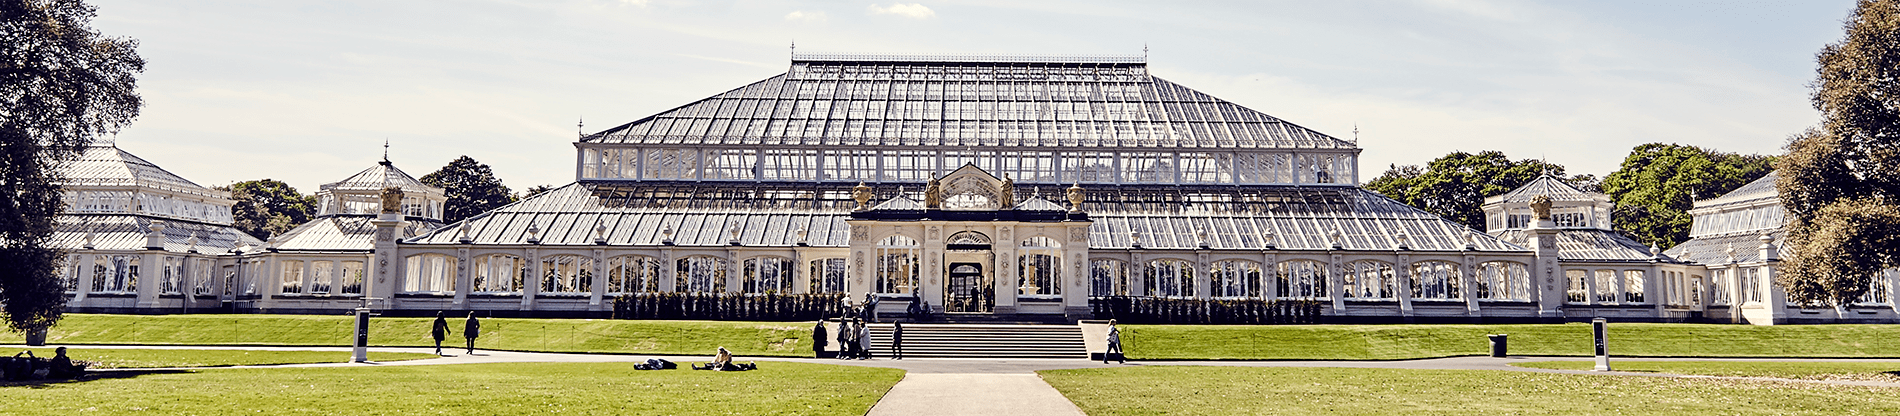 The Temperate House - Kew Gardens